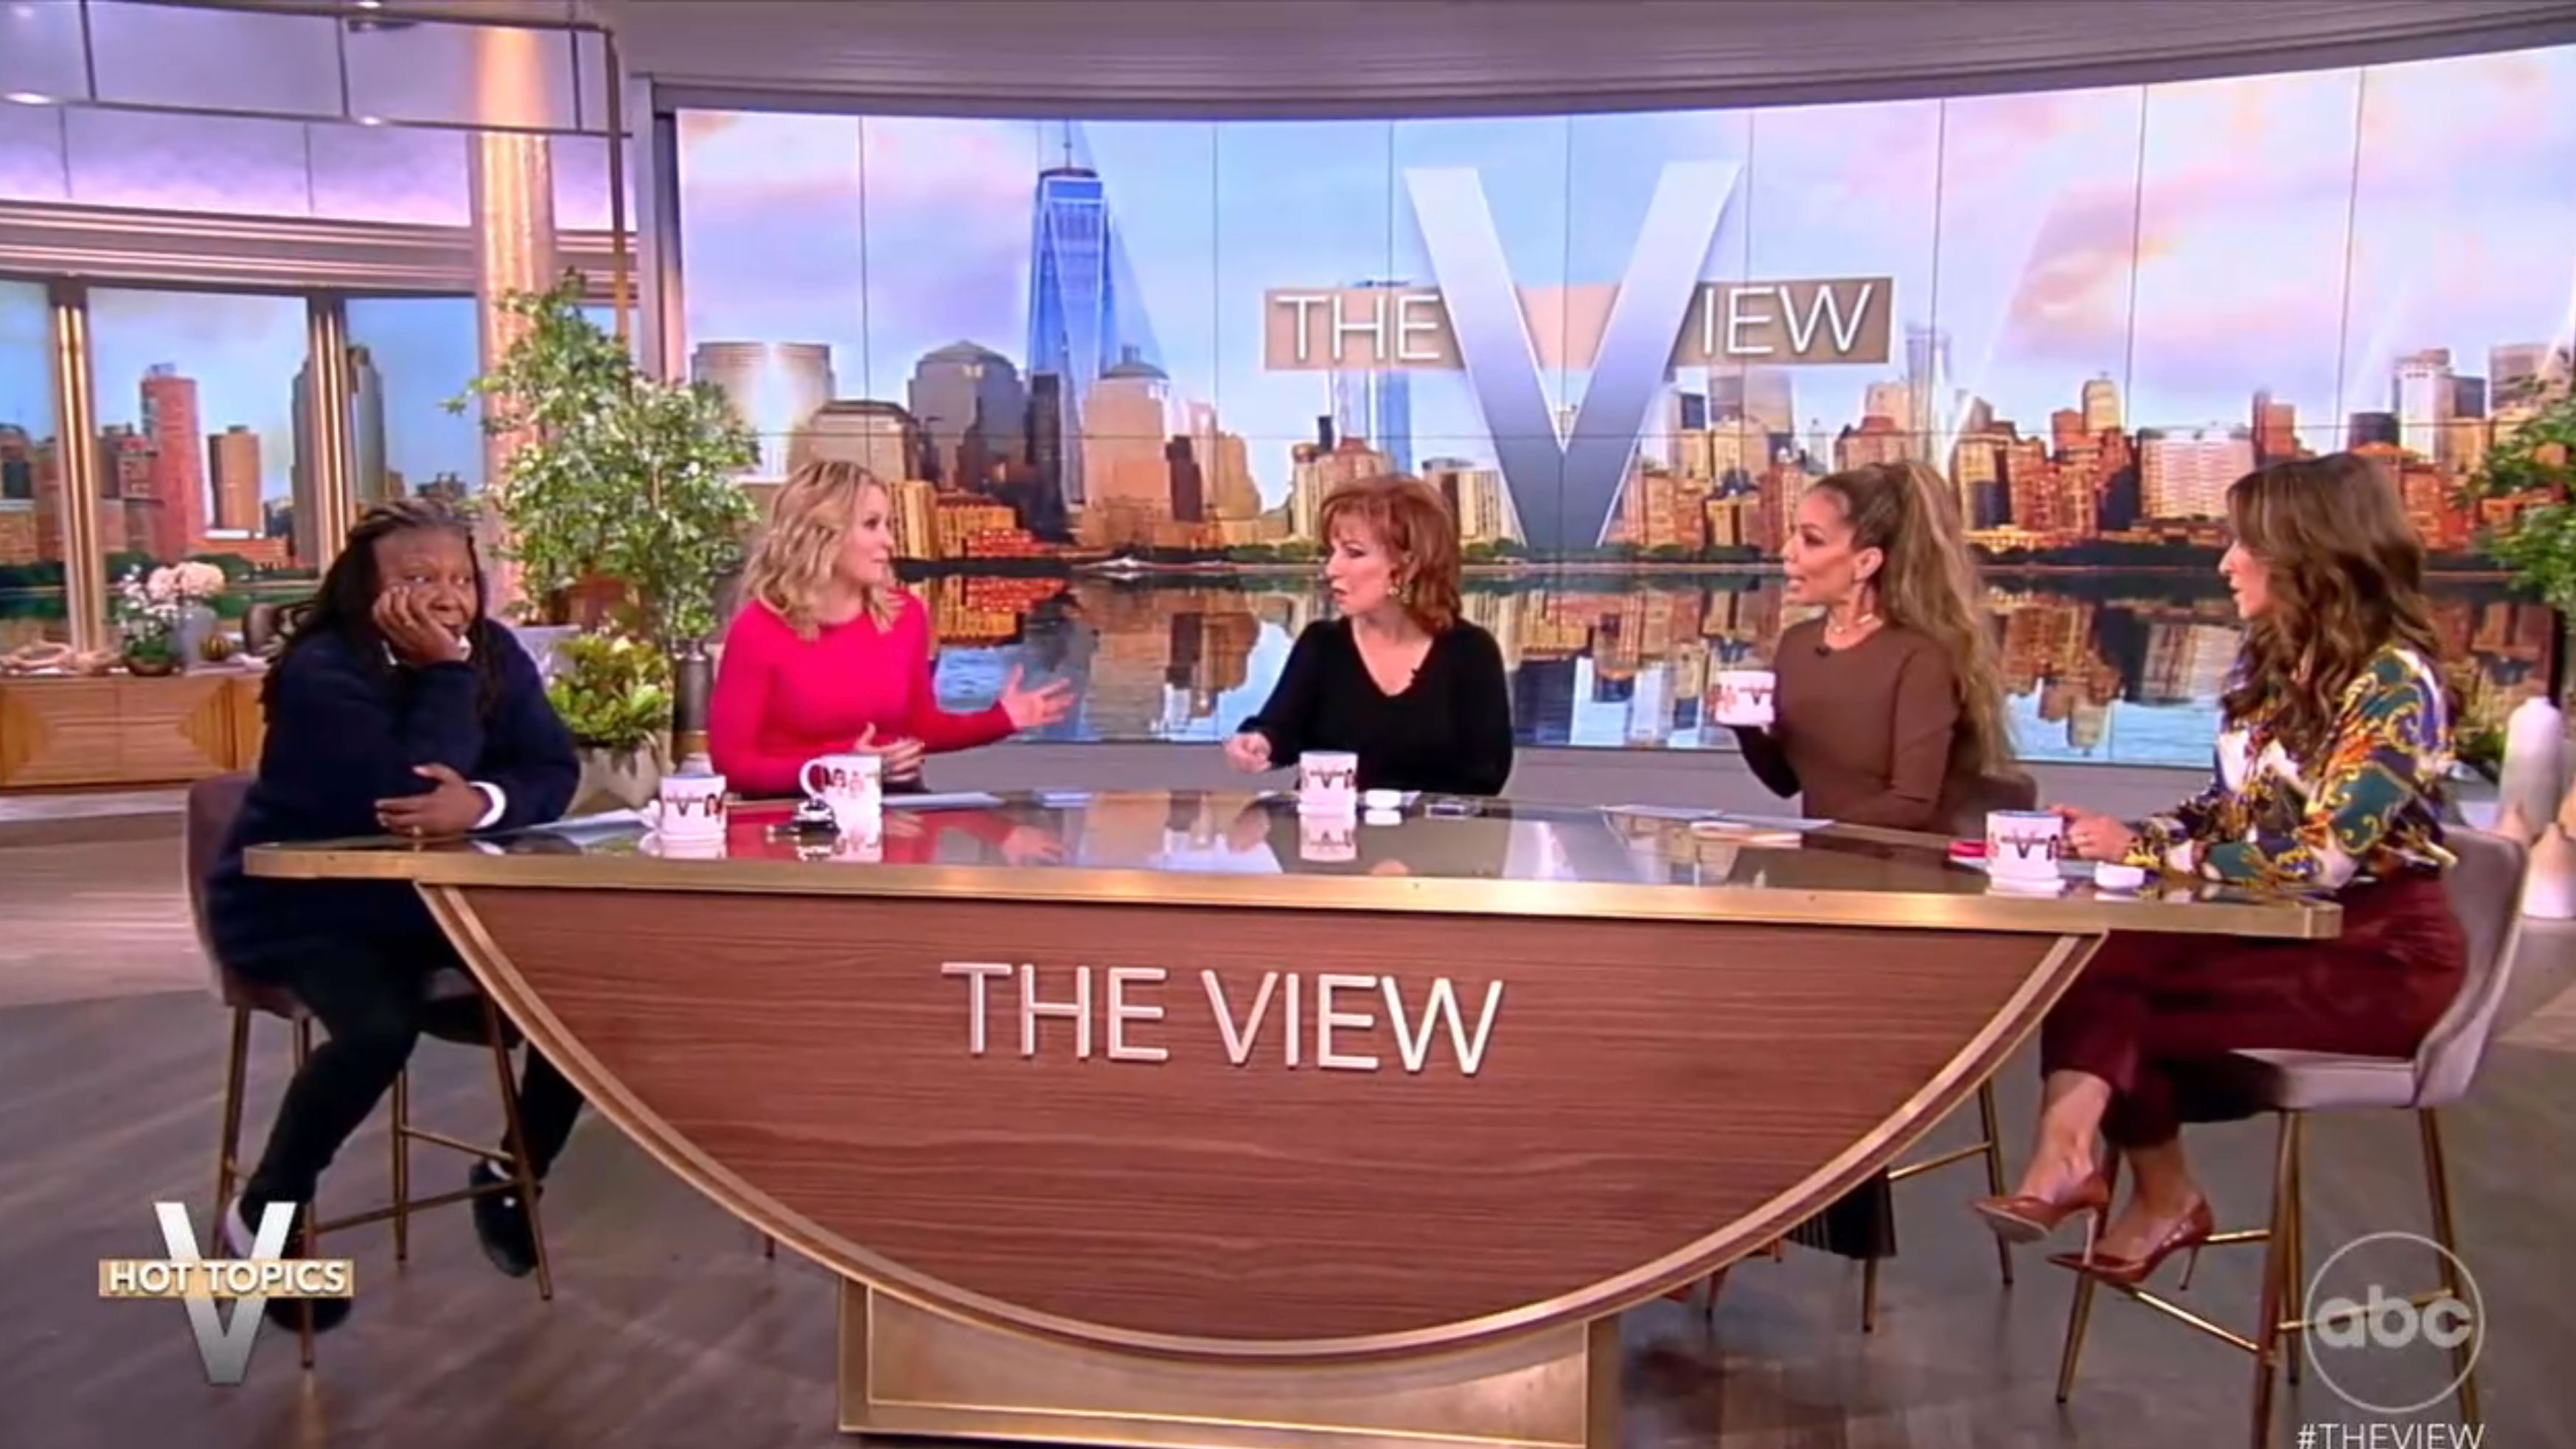 The View is set to return on Monday, April 29